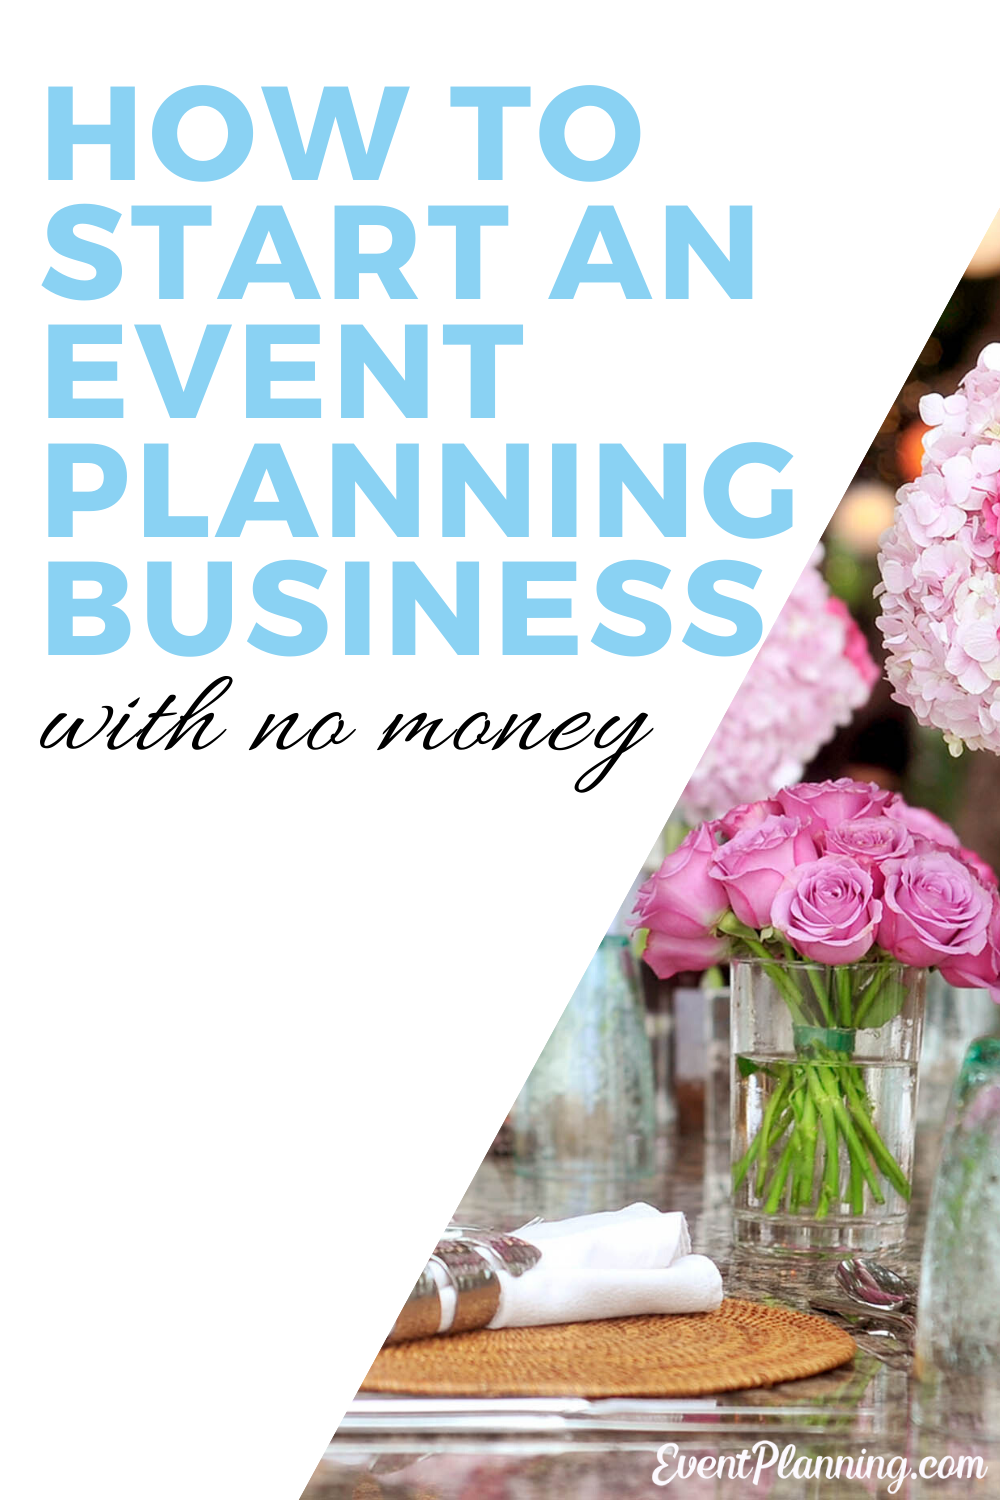 How to Start an event planning business with no money -   12 Event Planning Career ideas